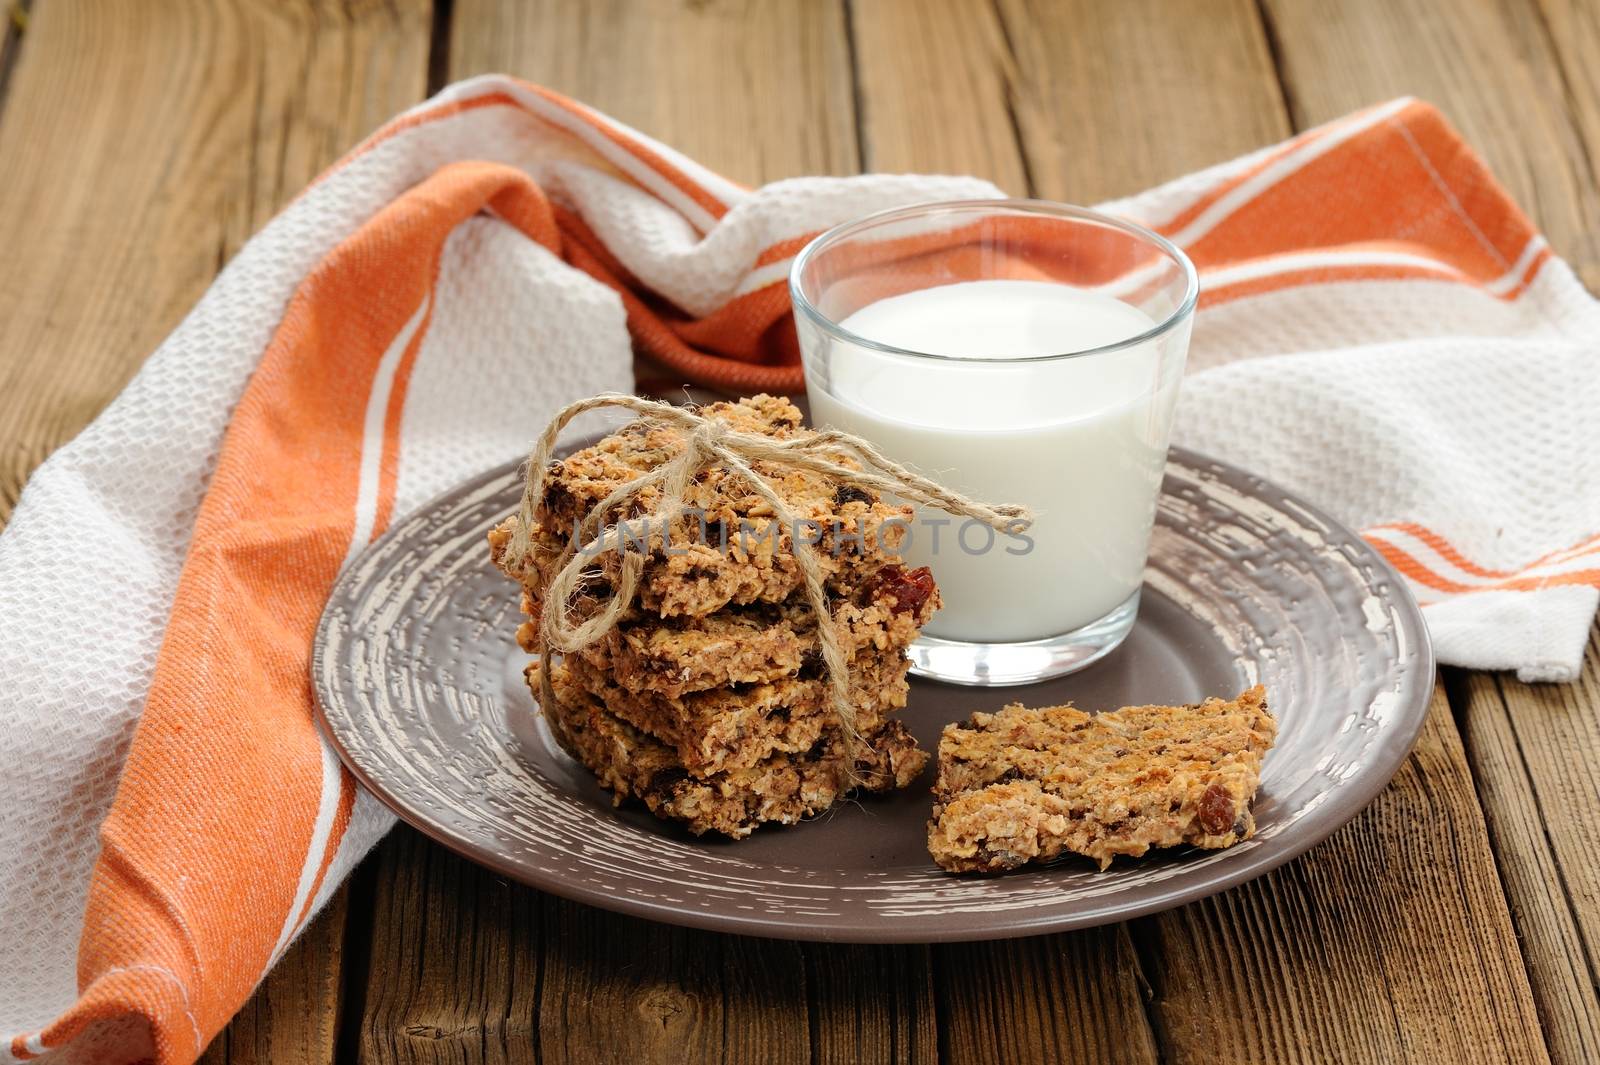 Granola bars with glass of milk on wooden background horizontal